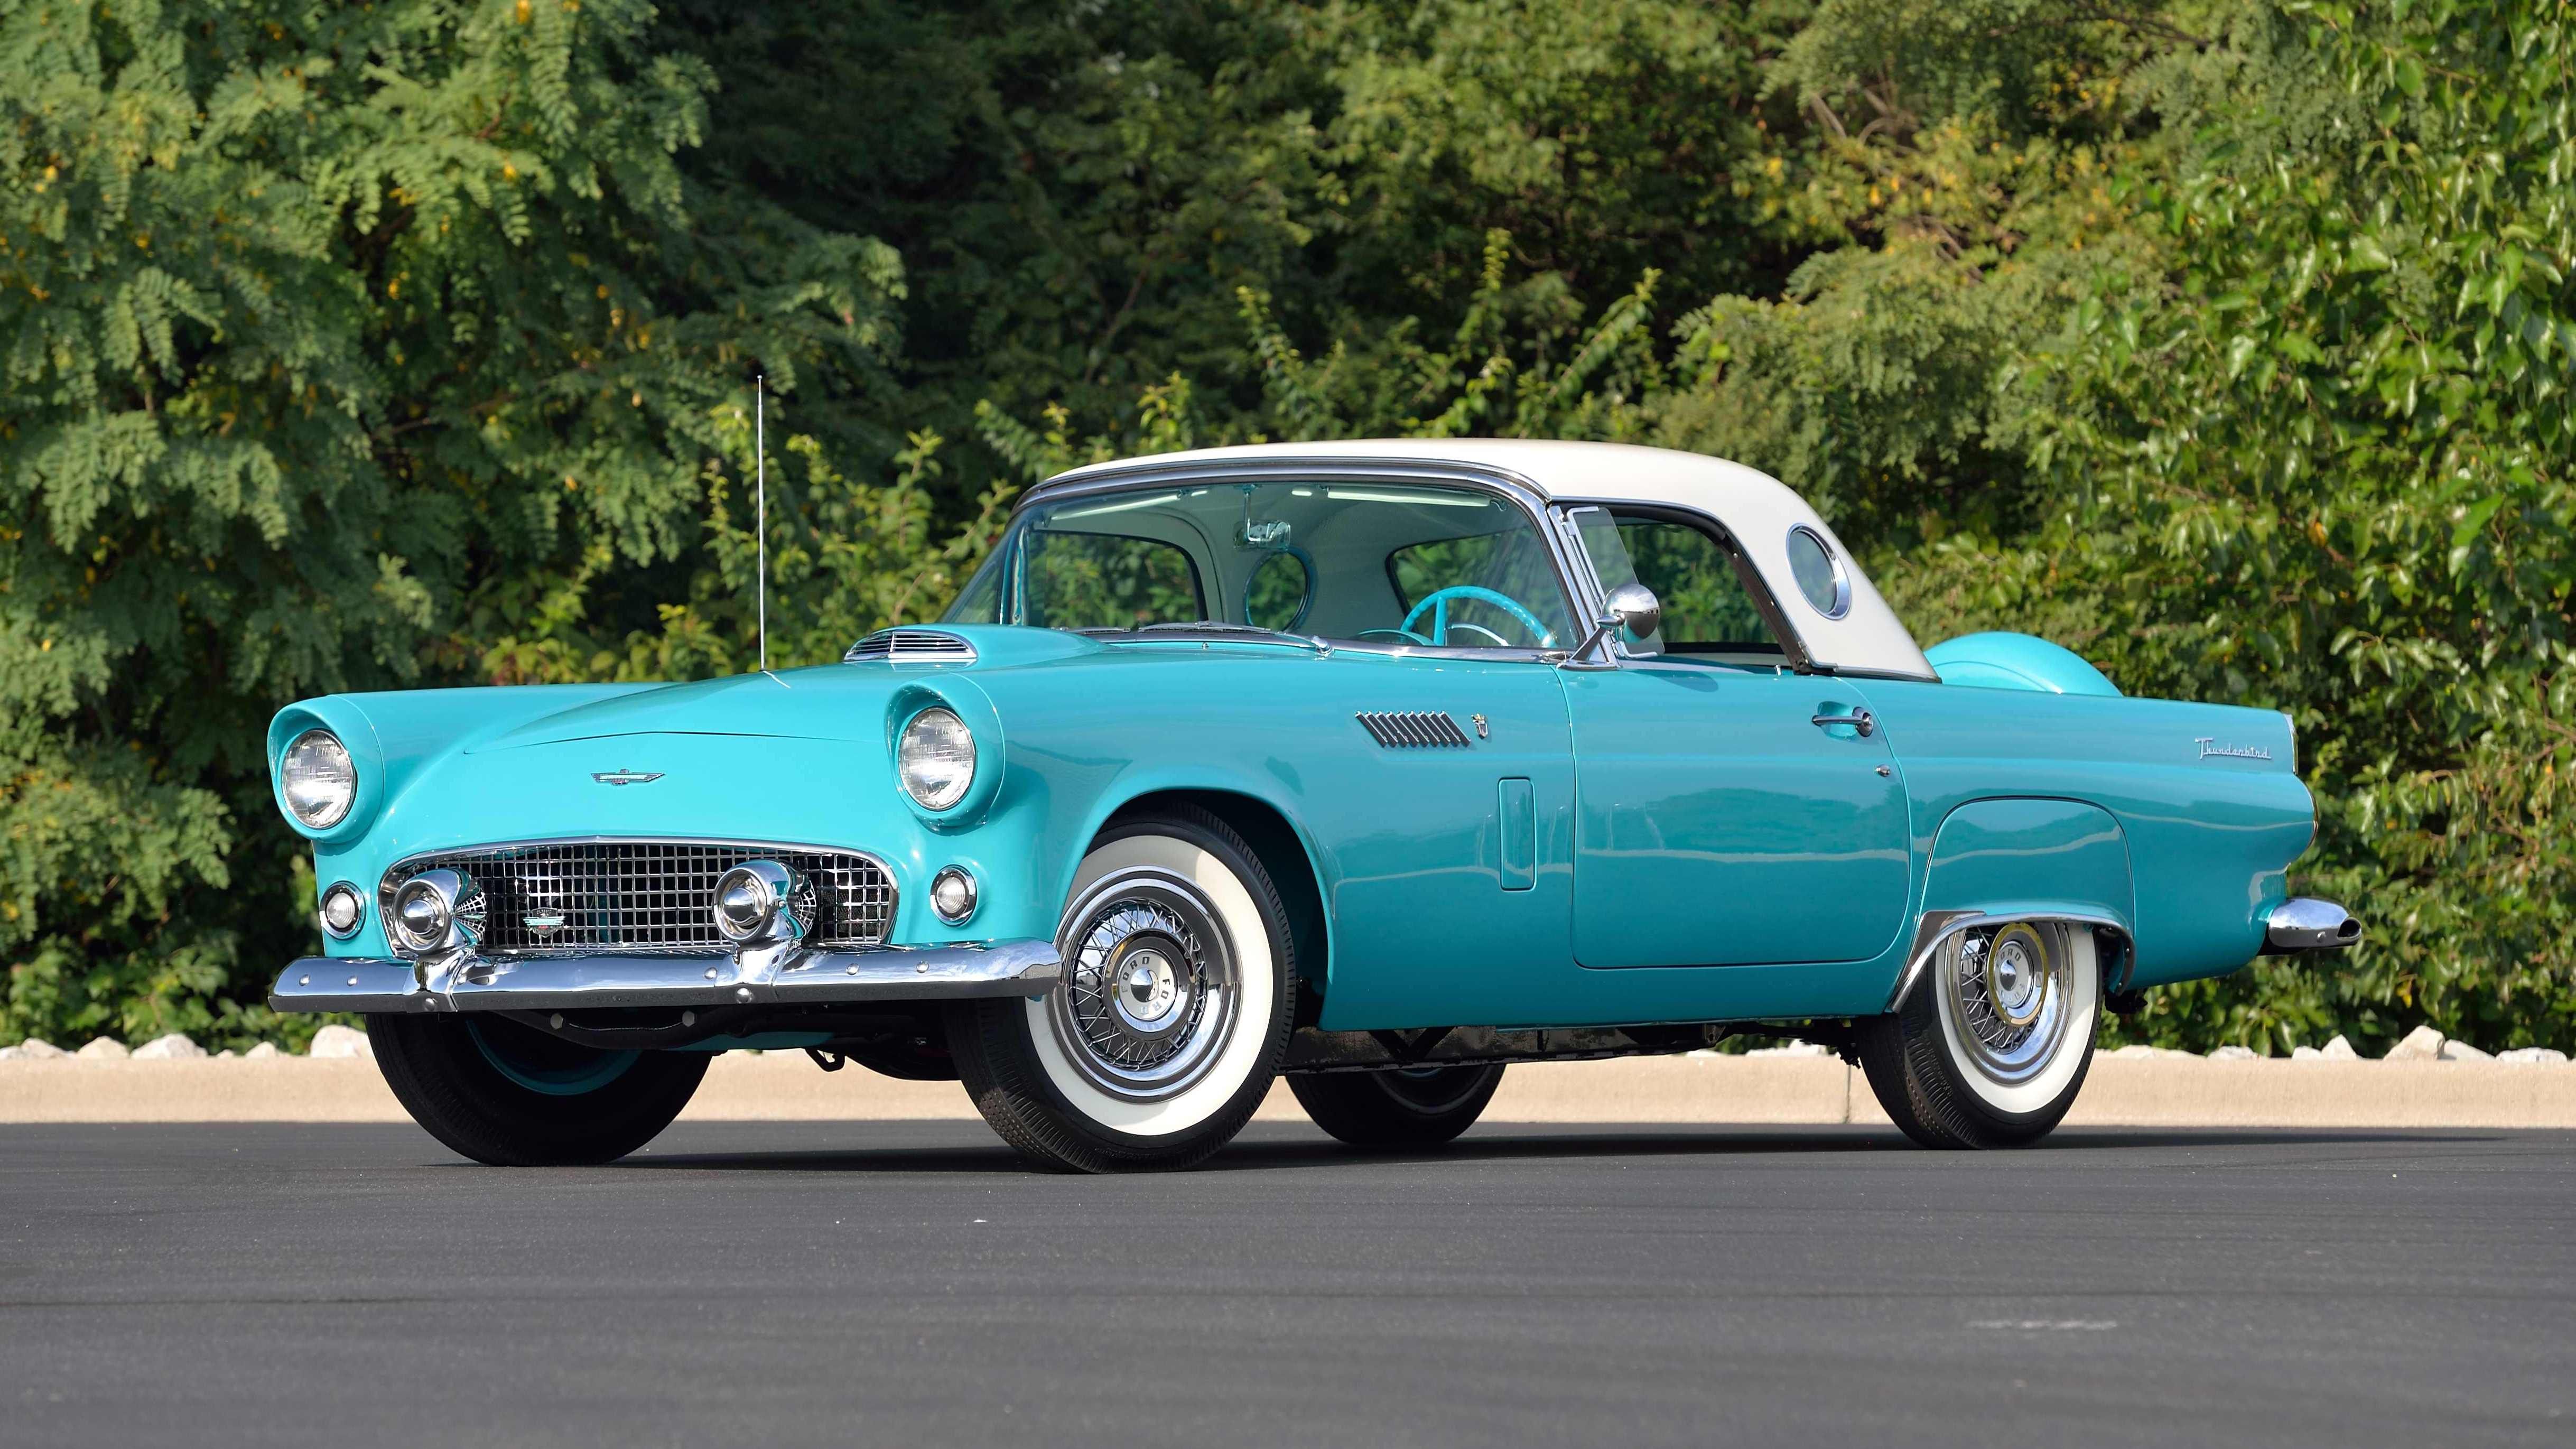 1956 #FORD #THUNDERBIRD #ClassicCars #Wheels #SportsCars #Turquoise ...